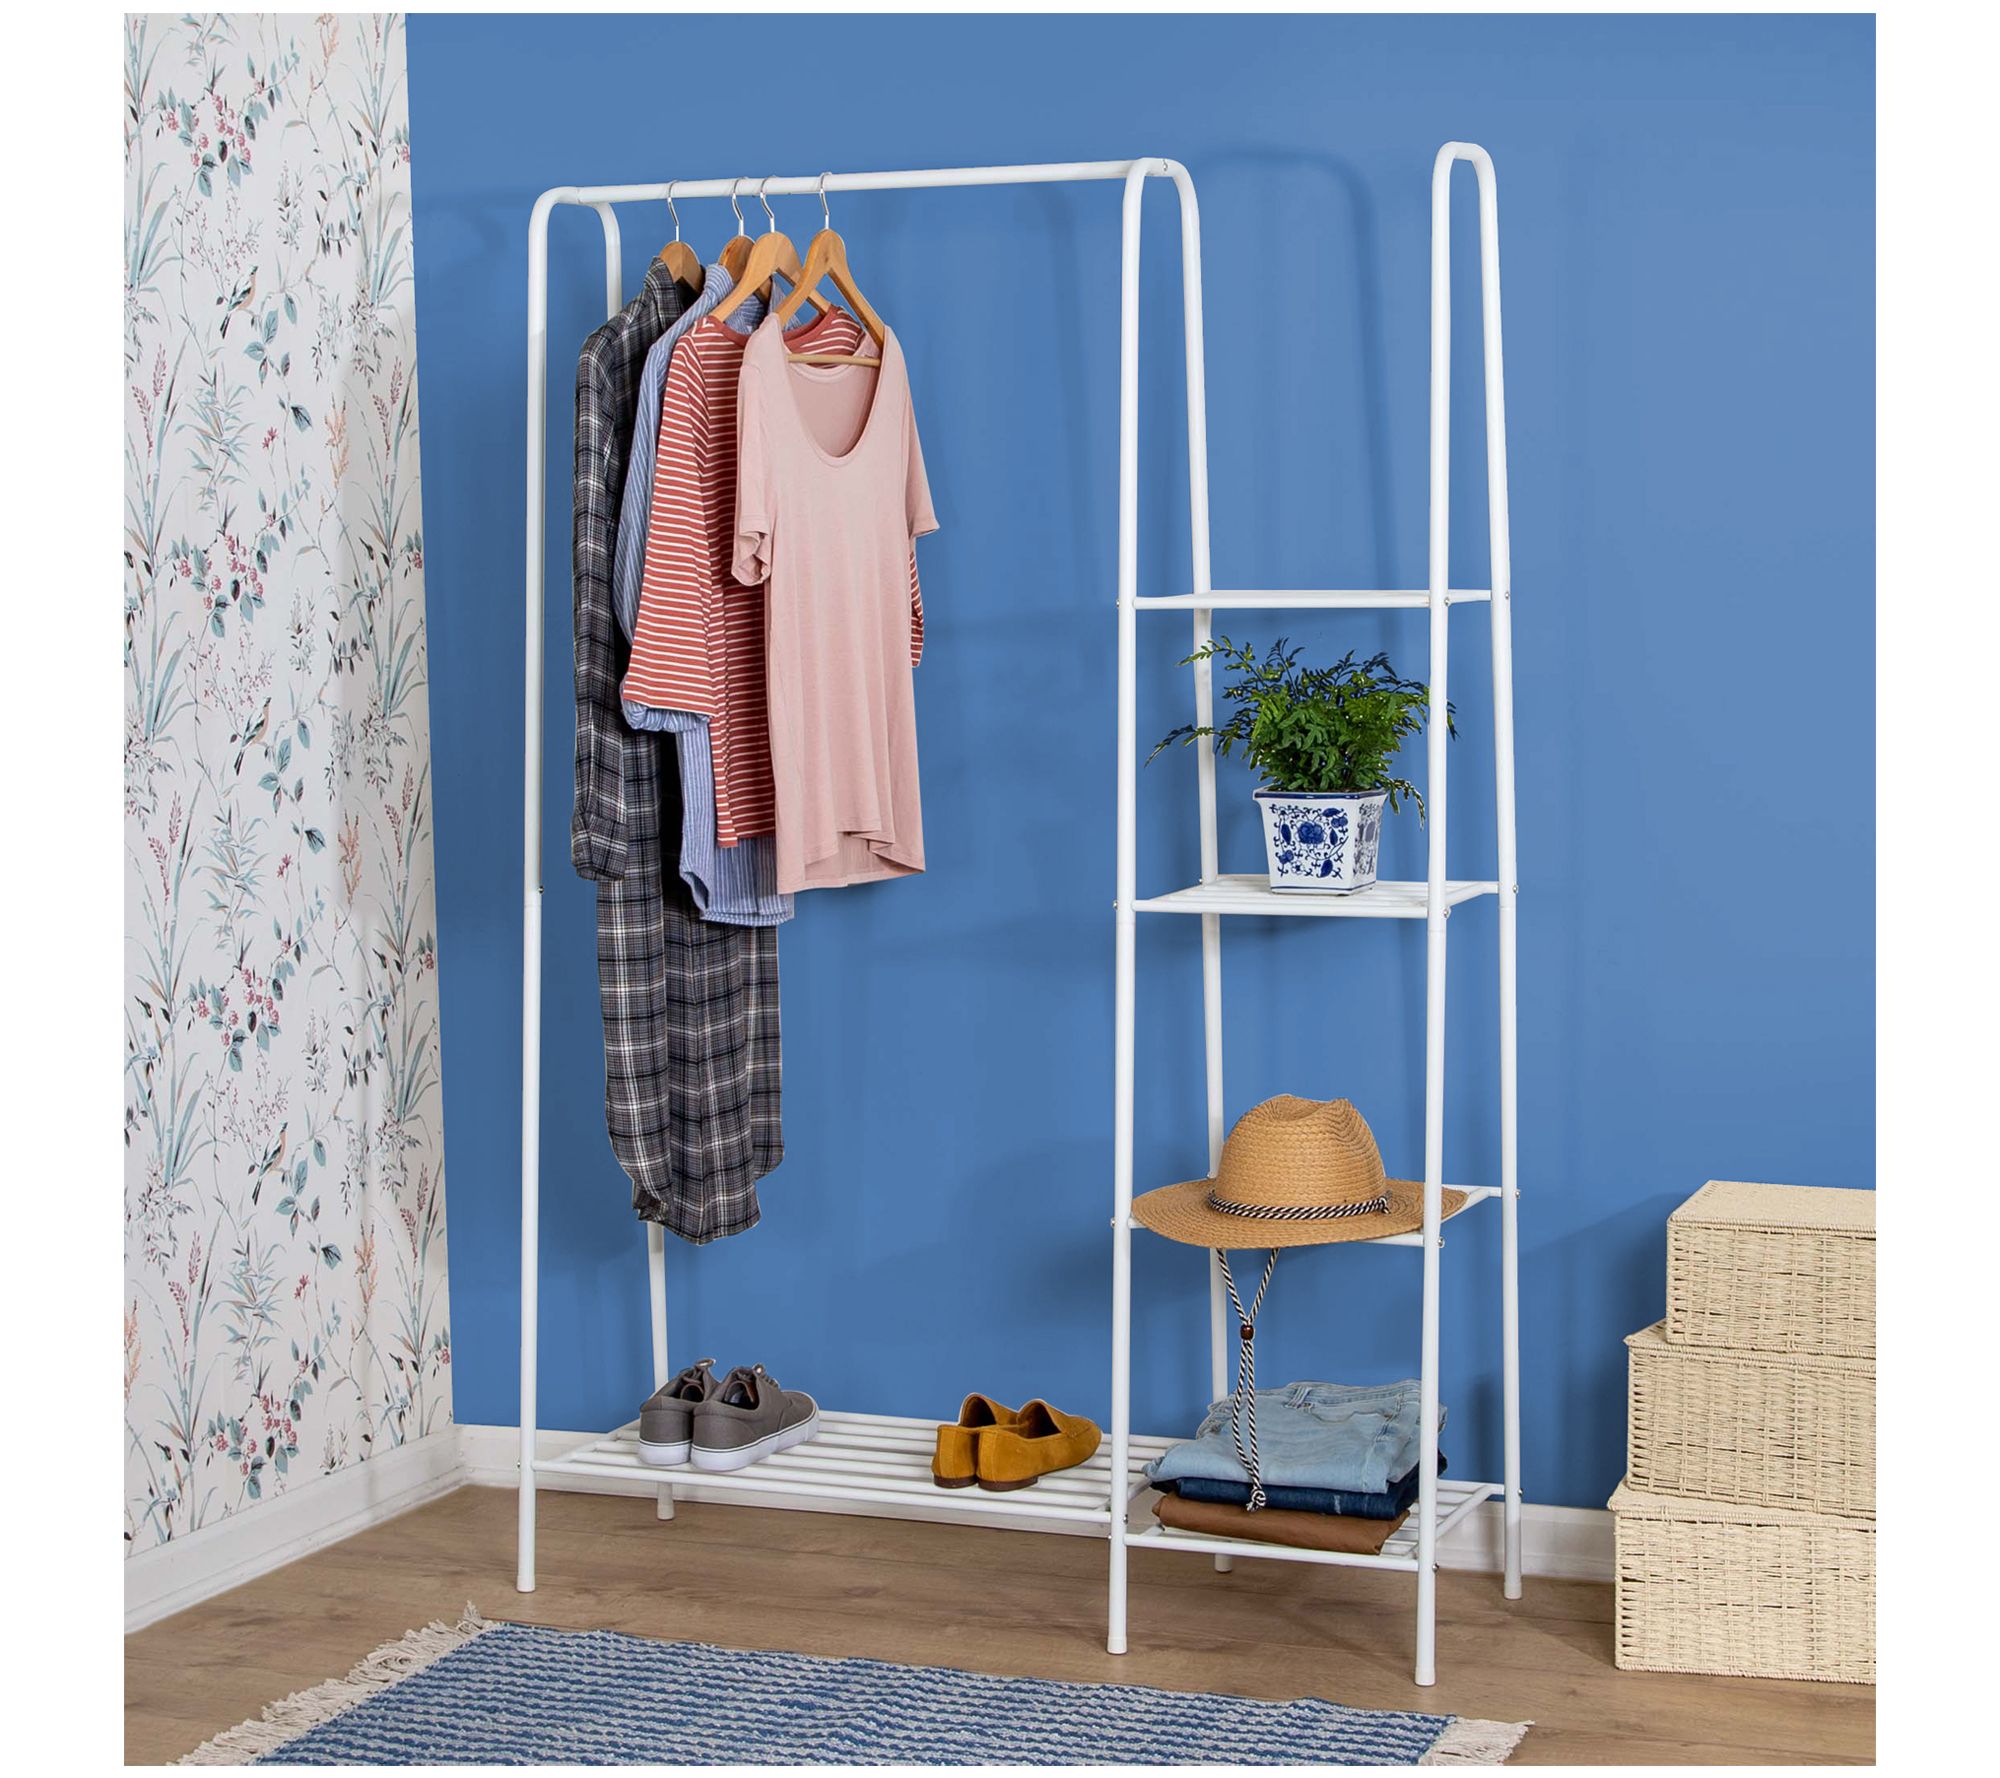 BAMBOO CLOTHING RACK in Rustic Style, Clothing Stand With Open Shelving,  Wood Shelf With Hanger Rack, Clothing Rack, Coat Rack With Shelf 